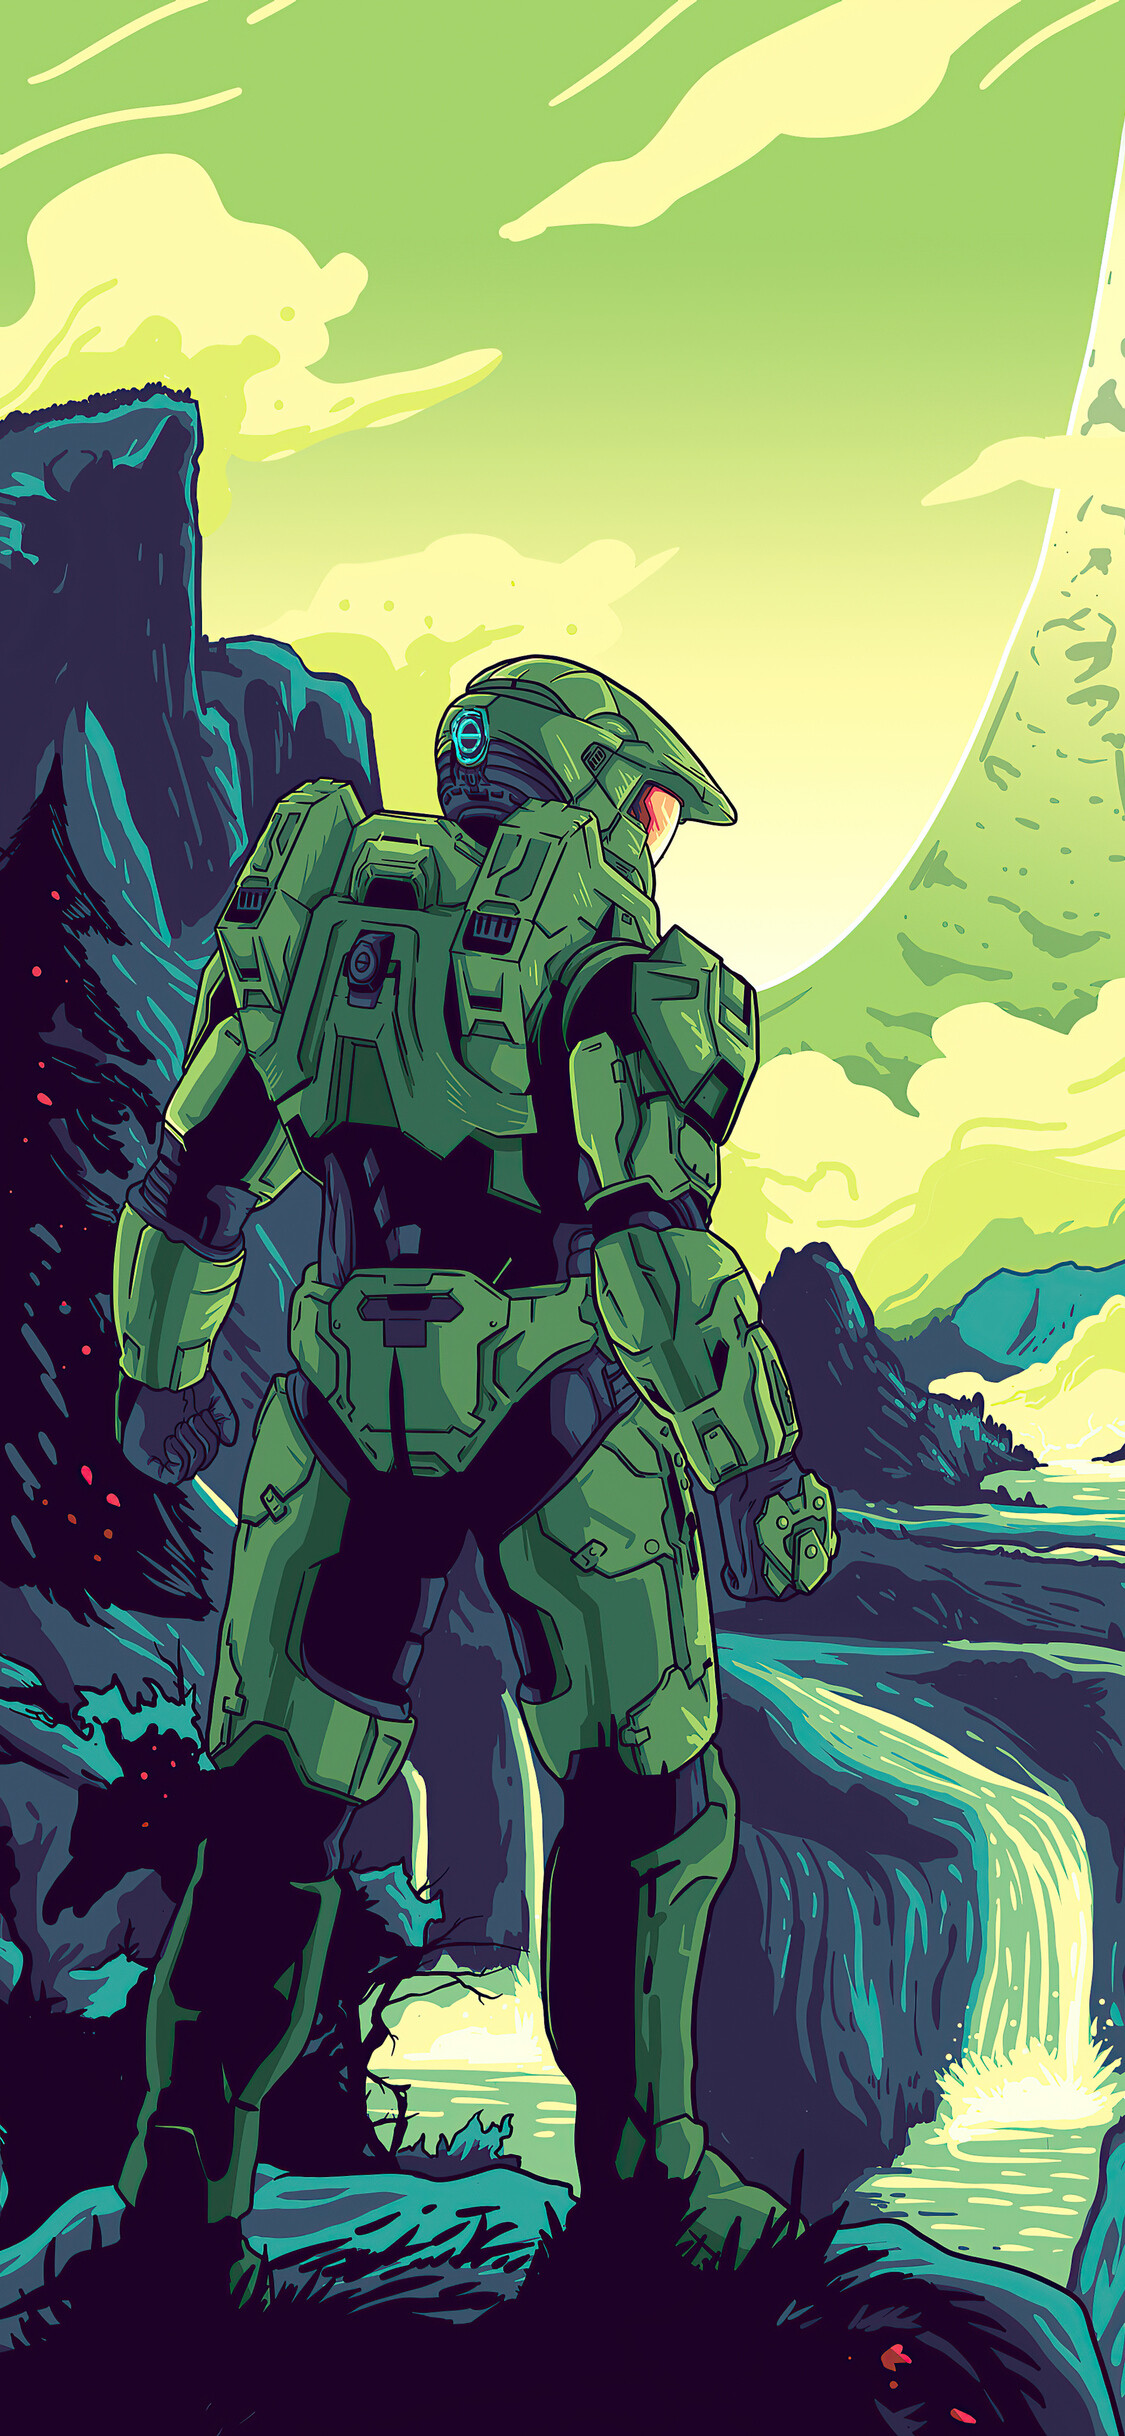 Halo: Cortana was created as a game design requirement to guide the character as Master Chief throughout the game world, but she became an important aspect of revealing the Chief's humanity. 1130x2440 HD Background.